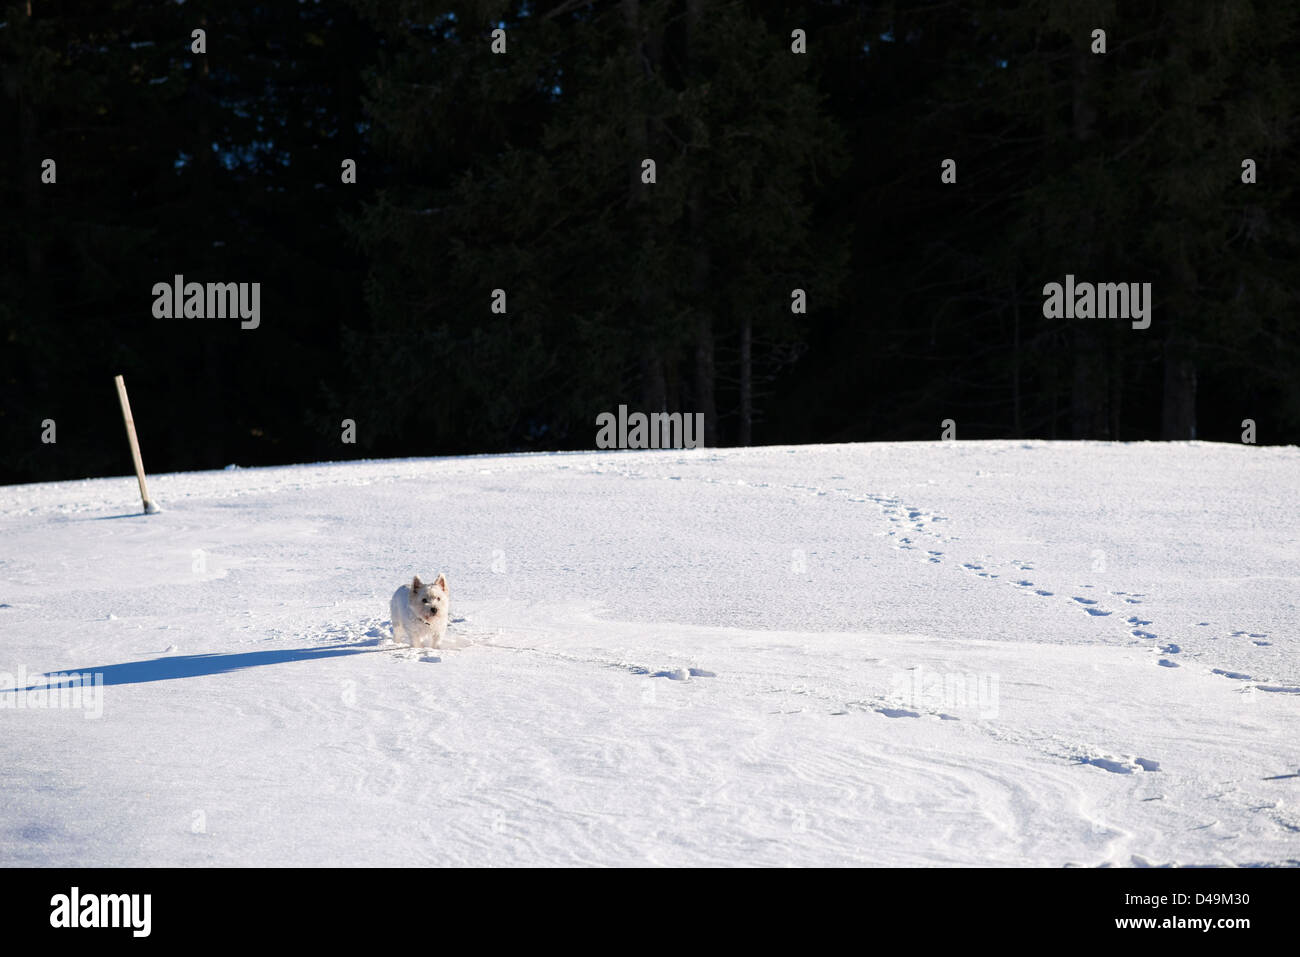 bWhite dog in a snowfield Stock Photo